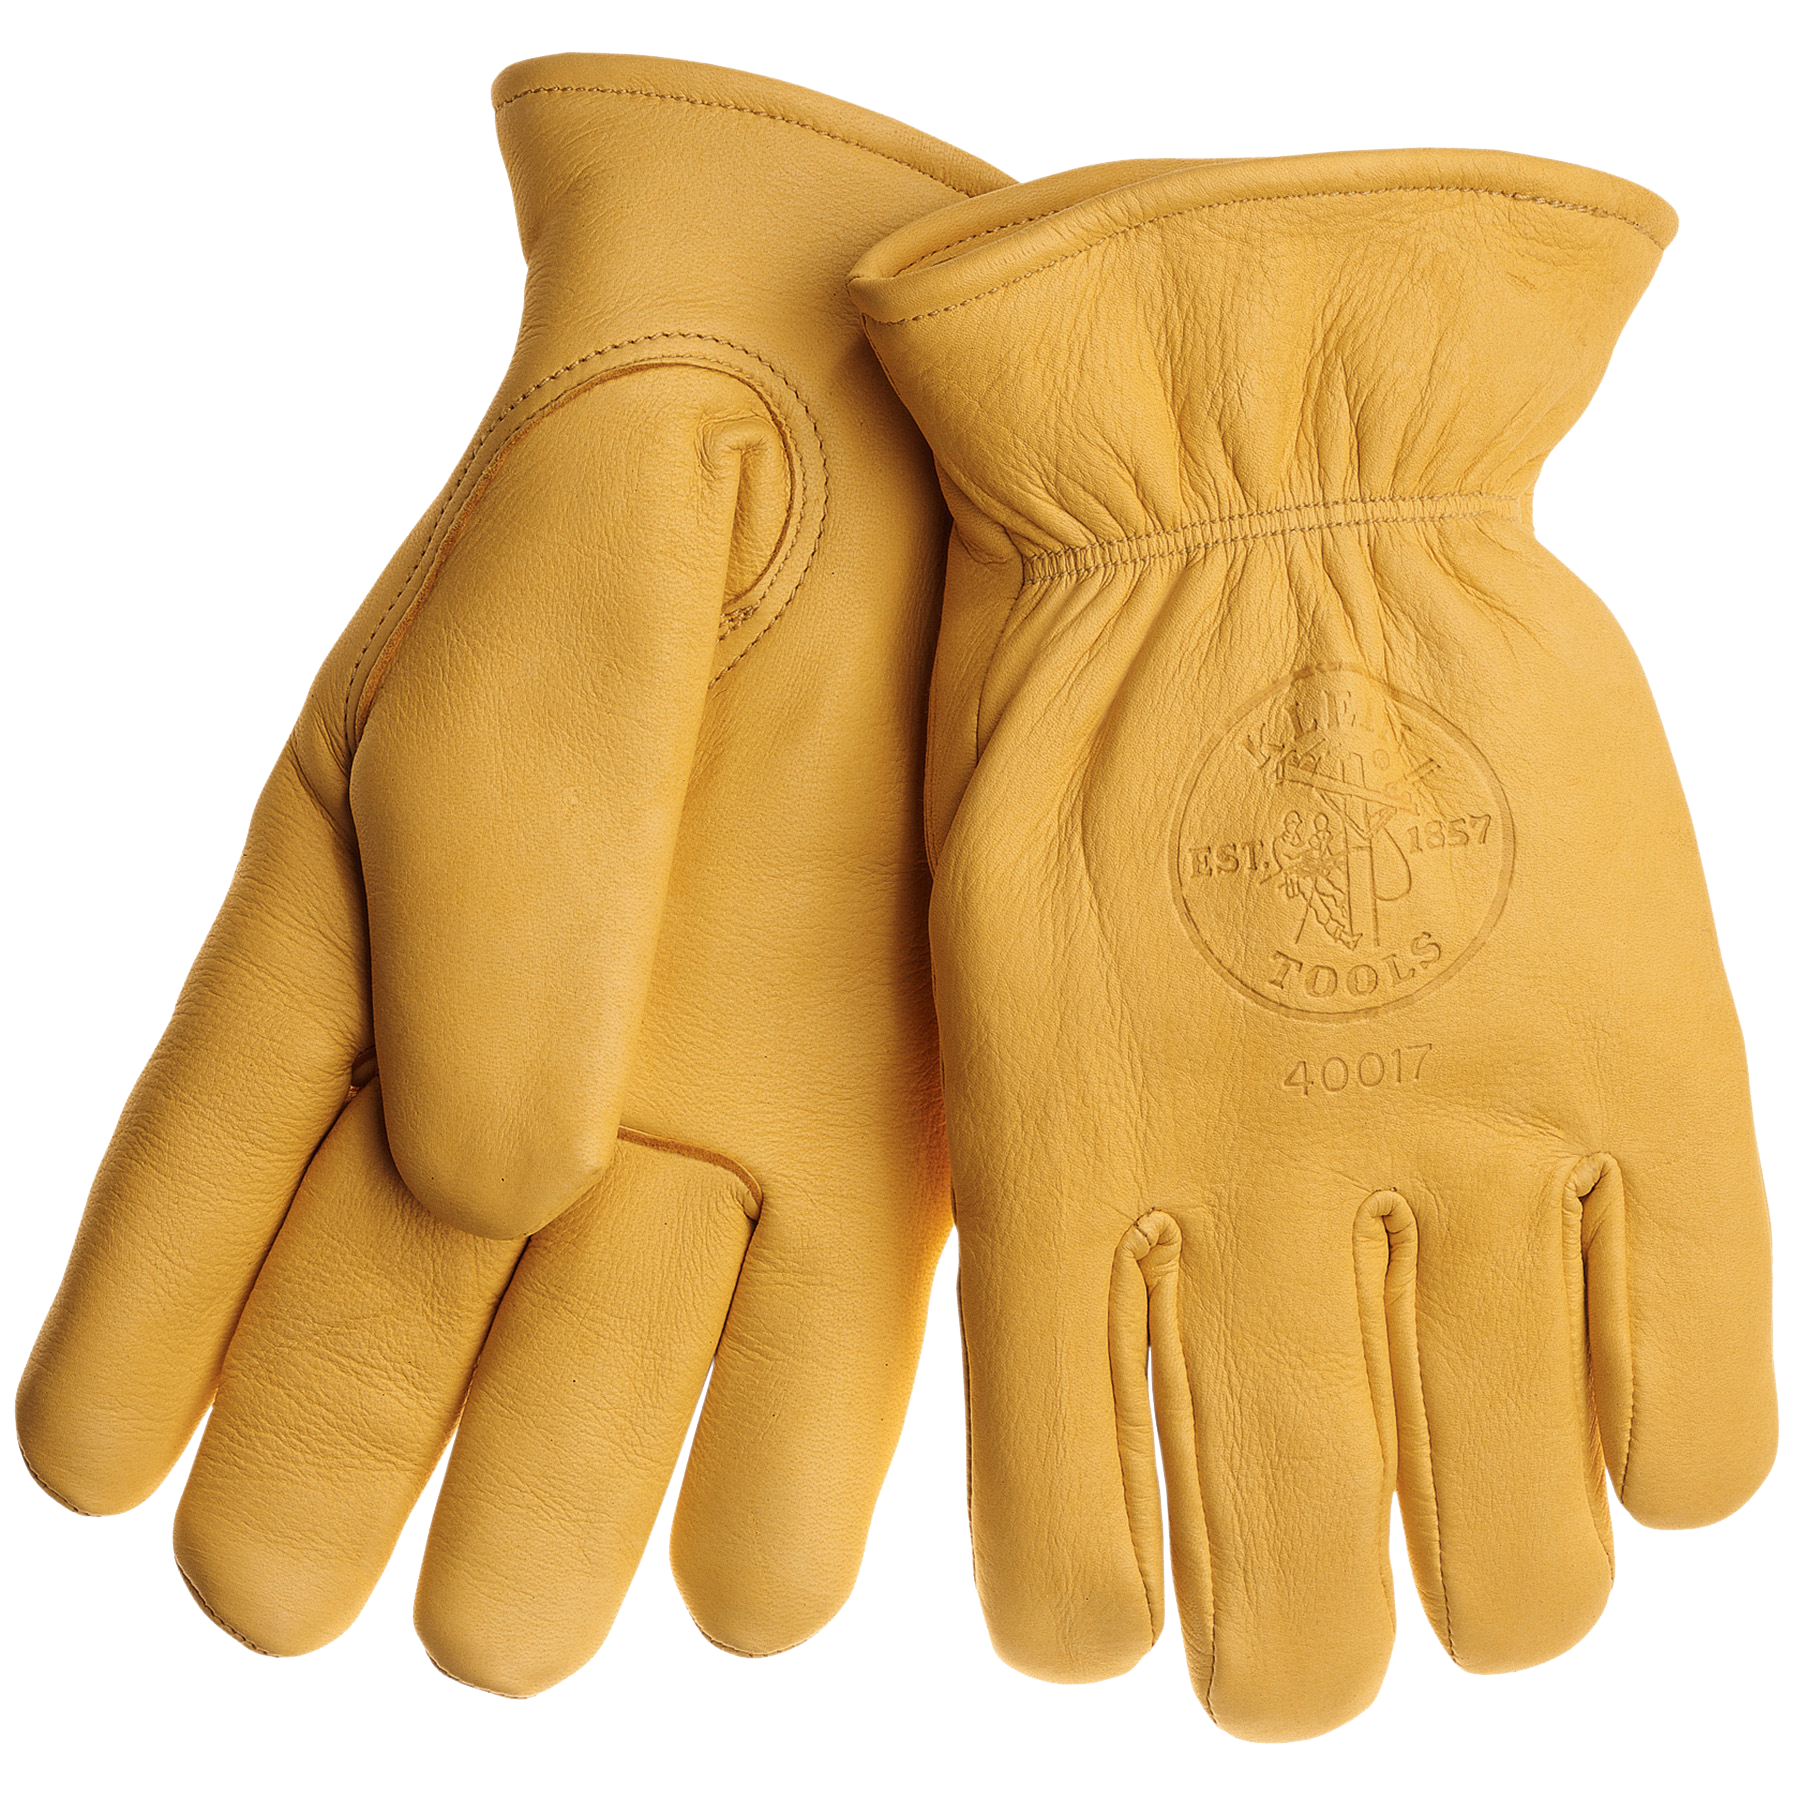 Gloves png transparent images. Glove clipart laboratory glove